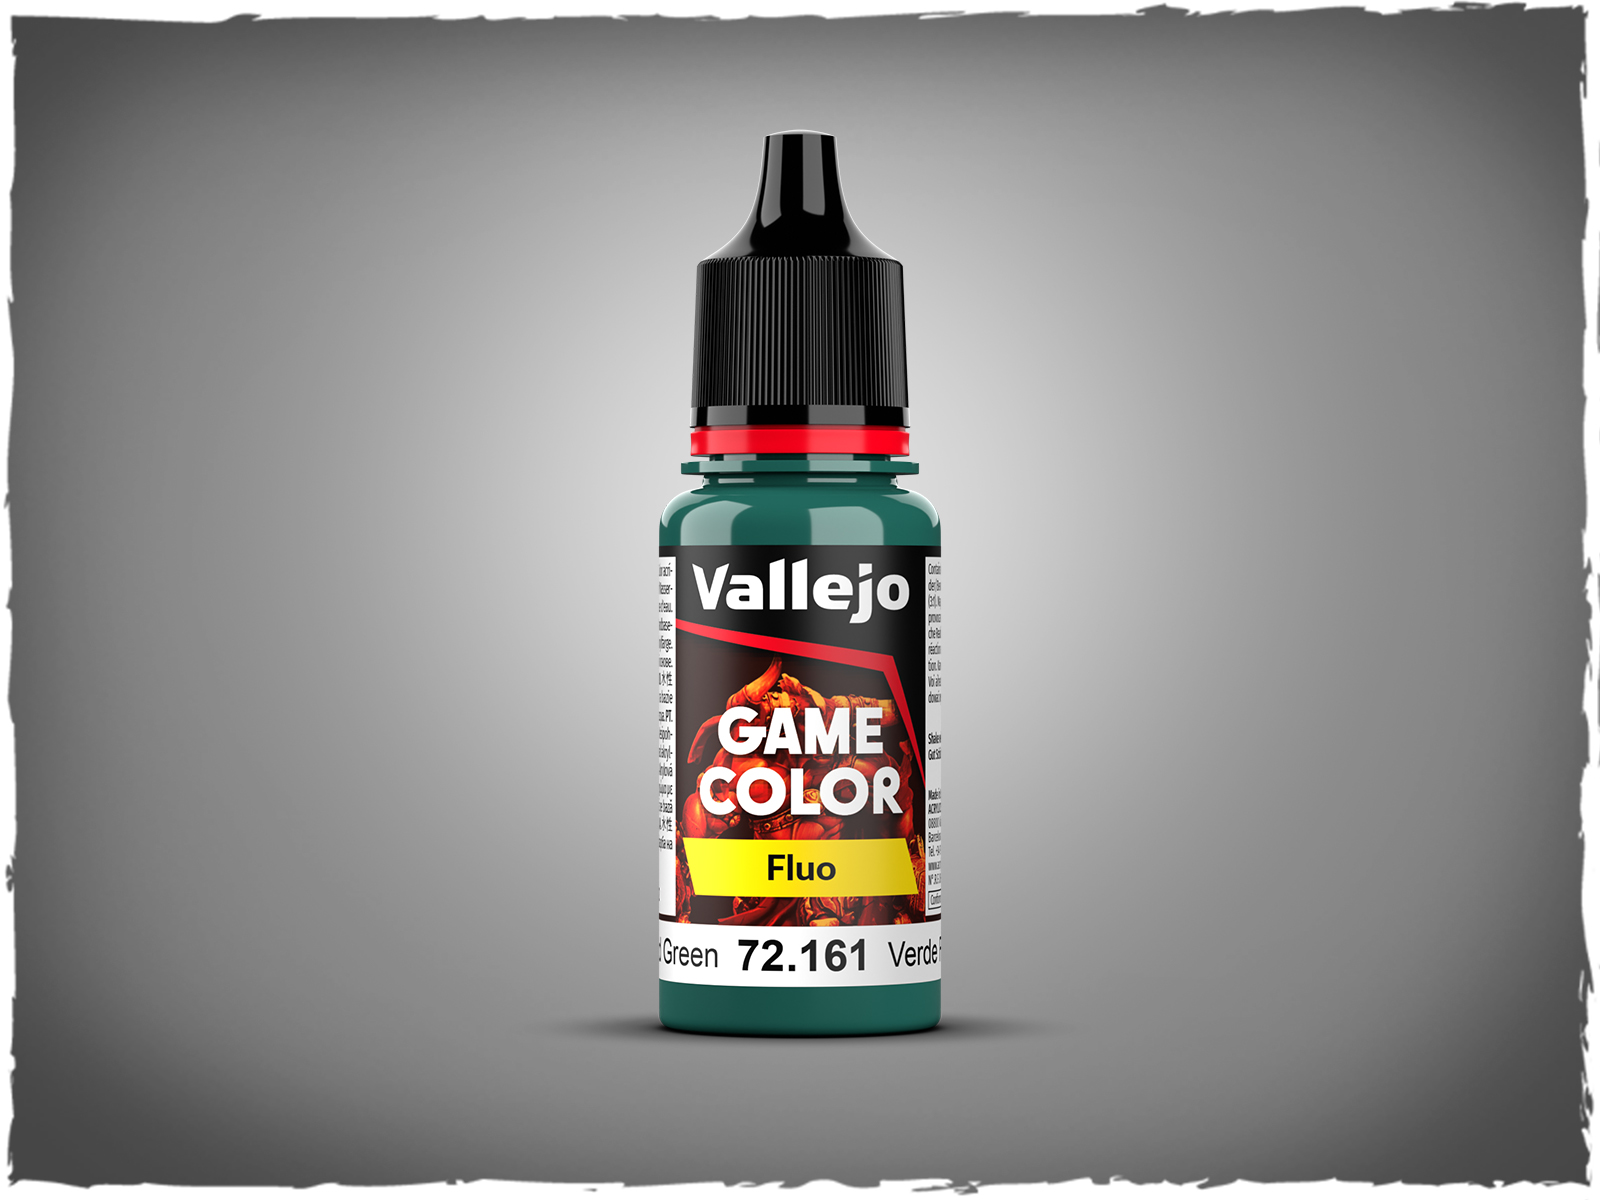 Vallejo Game Color Fluorescent Green Paint, 17ml, 0.57 Fl Oz (Pack of 1)